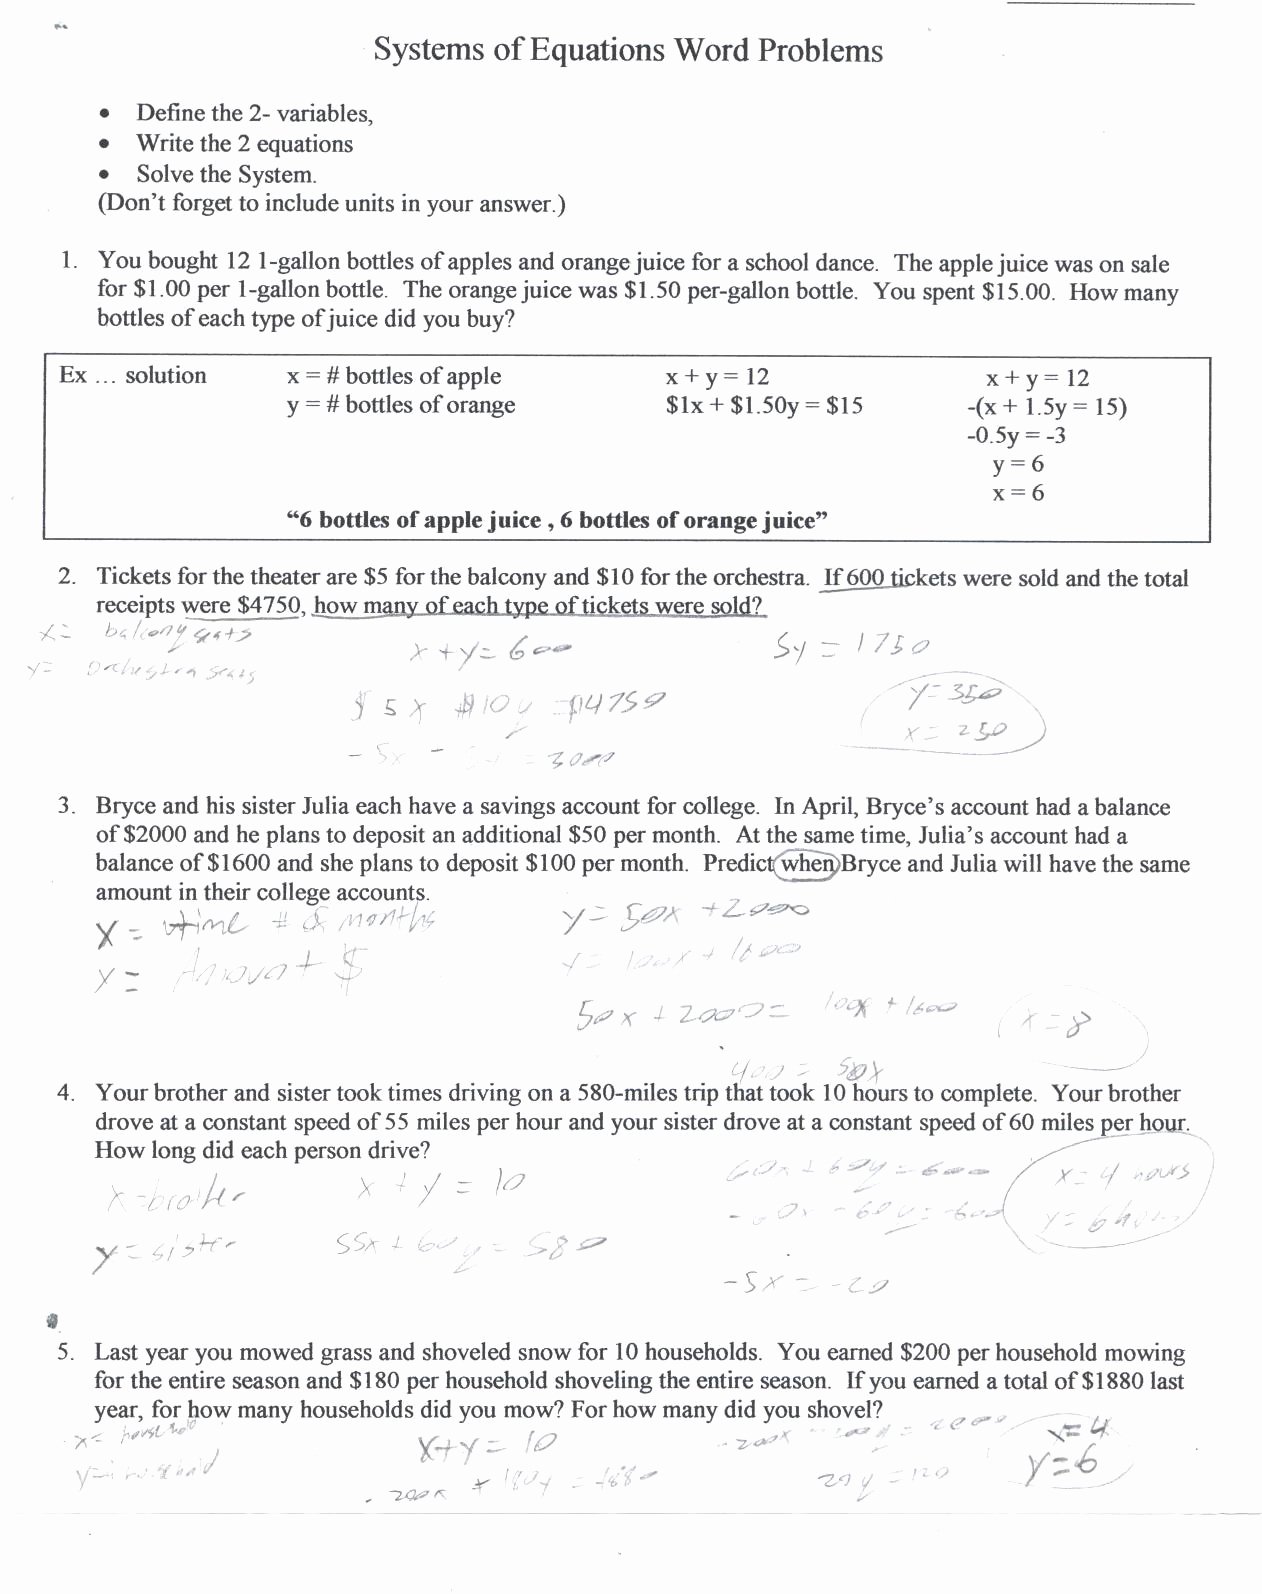 Linear Equation Word Problems Worksheet Beautiful Algebra 1 Worksheet Linear Equation Word Problems Answers